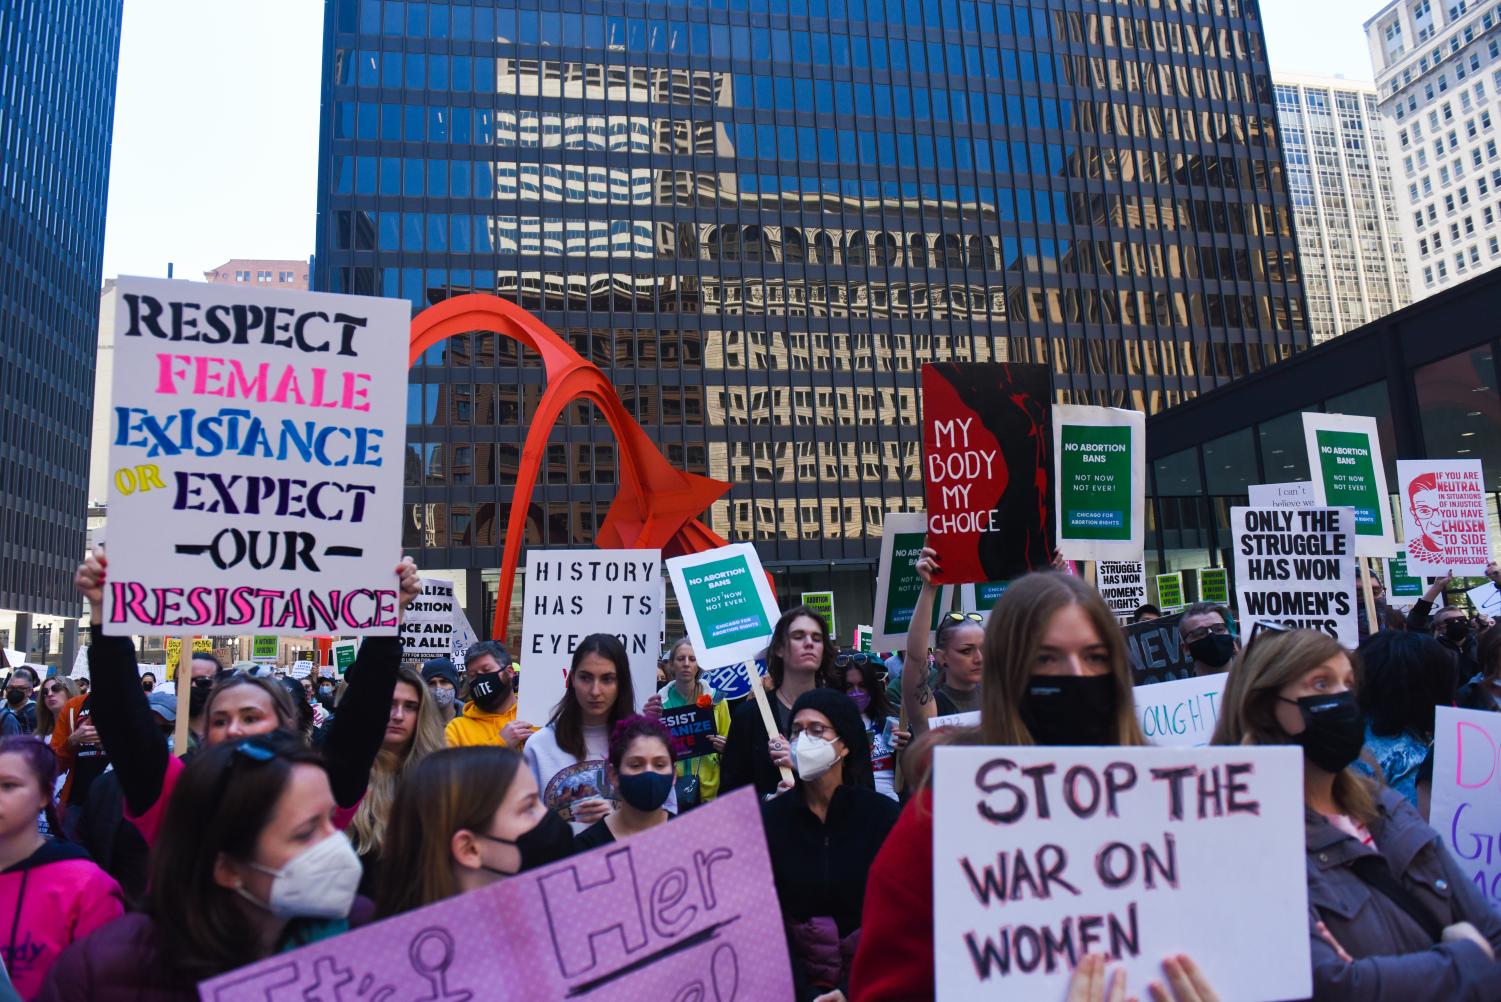 A+crowd+gathered+at+Federal+Plaza+in+Chicago+Saturday+afternoon+for+what+organizers+called+%E2%80%9CWe+Won%E2%80%99t+Go+Back%3A+Rally+to+Defend+Abortion+Rights.%E2%80%9D+The+rally+was+organized+by+a+collection+of+Chicago+activist+organizations+focused+mainly+on+women%E2%80%99s+rights+and+healthcare+rights.+The+protest+comes+after+a+draft+of+a+Supreme+Court+decision+that+would+overturn+Roe+v.+Wade+leaked+last+week.